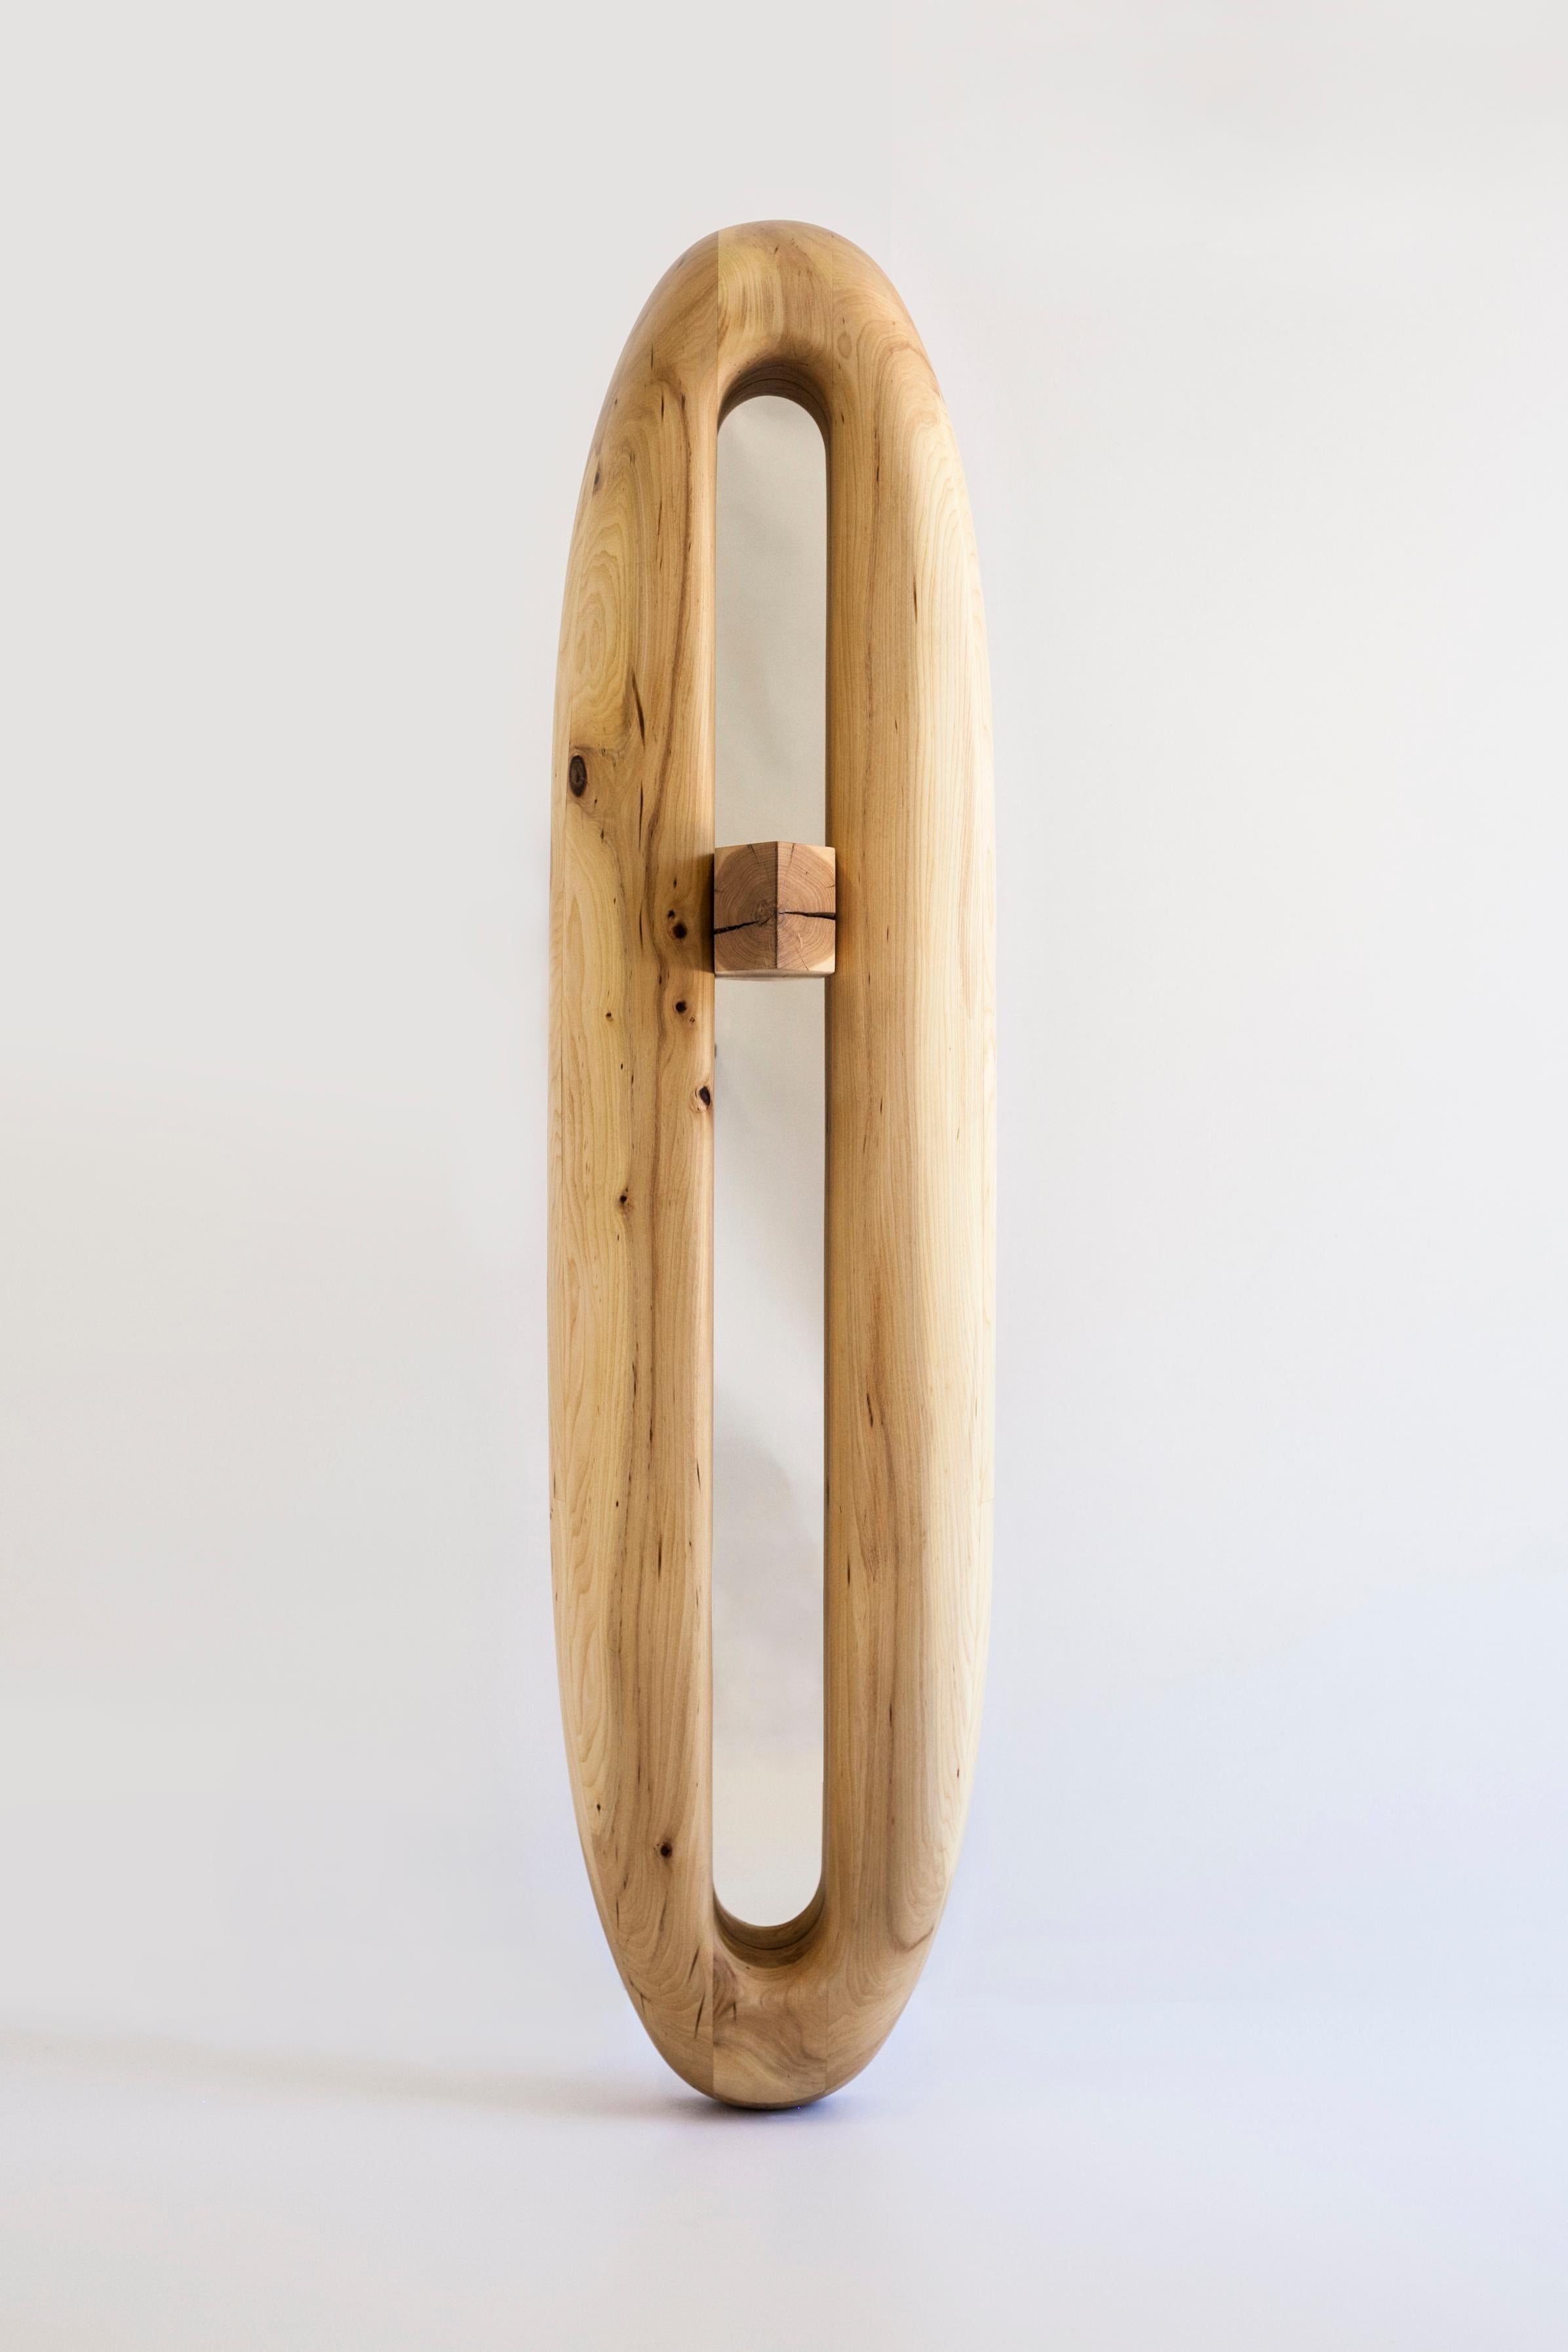 Anna Bera CD N25 by Nów
Designed by Anna Bera
Dimensions: D 30 x W 43 x H 180 cm
Materials: elm wood, oak wood

As an artist, woodcarver and carpenter, Anna creates wooden furniture pieces, mainly storages and cabinets crafted by hand in